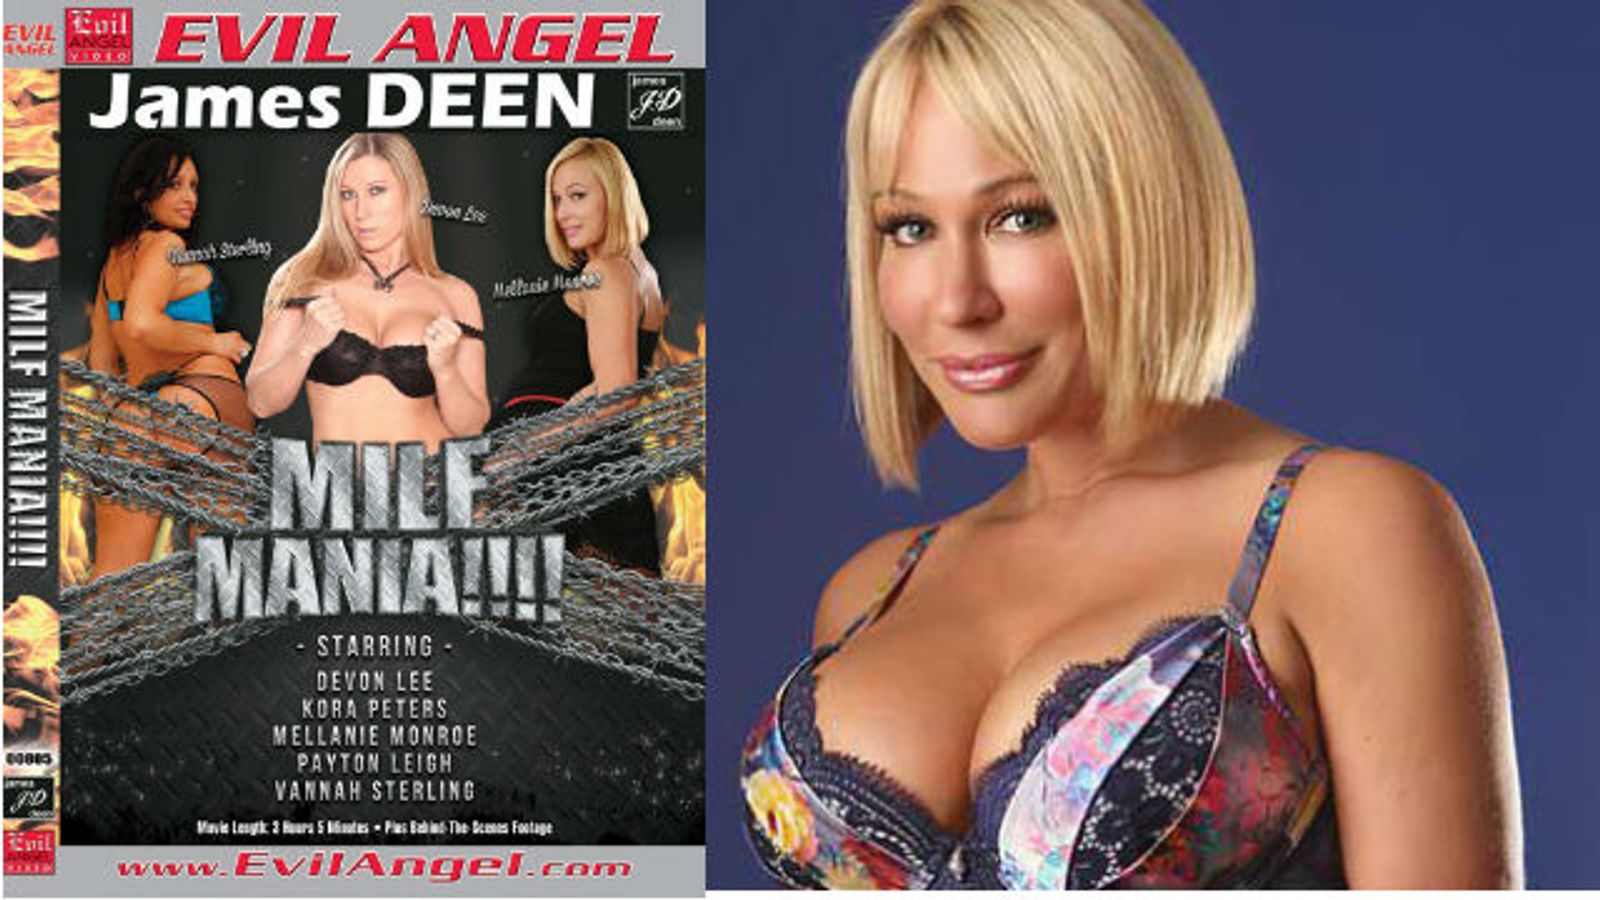 Mellanie Monroe Delivers for Evil Angel in 'MILF Mania!!!!'